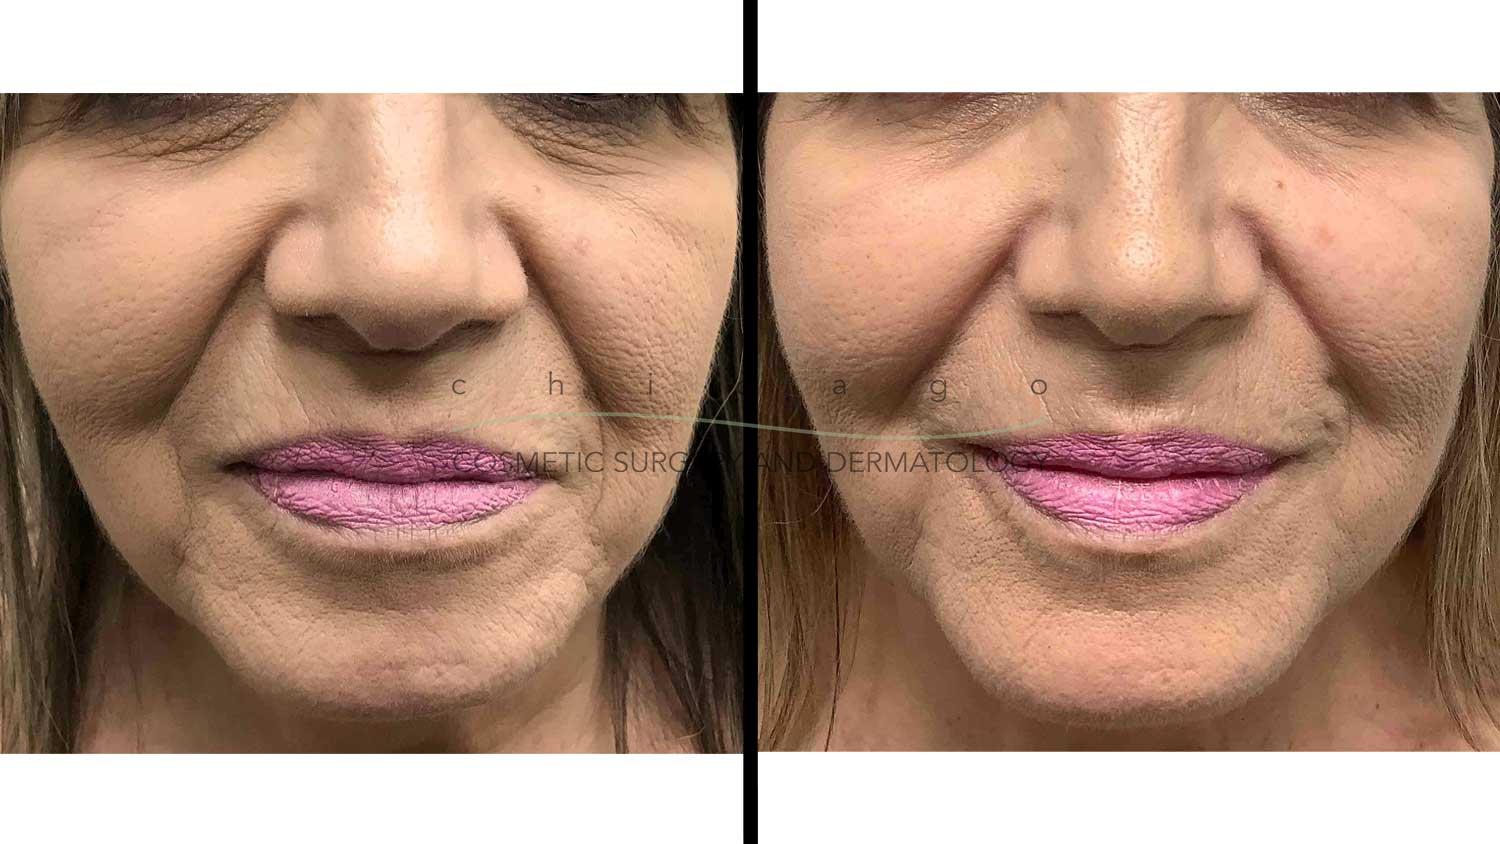 facial rejuvenation from injectable fillers with Dr. Pritzker